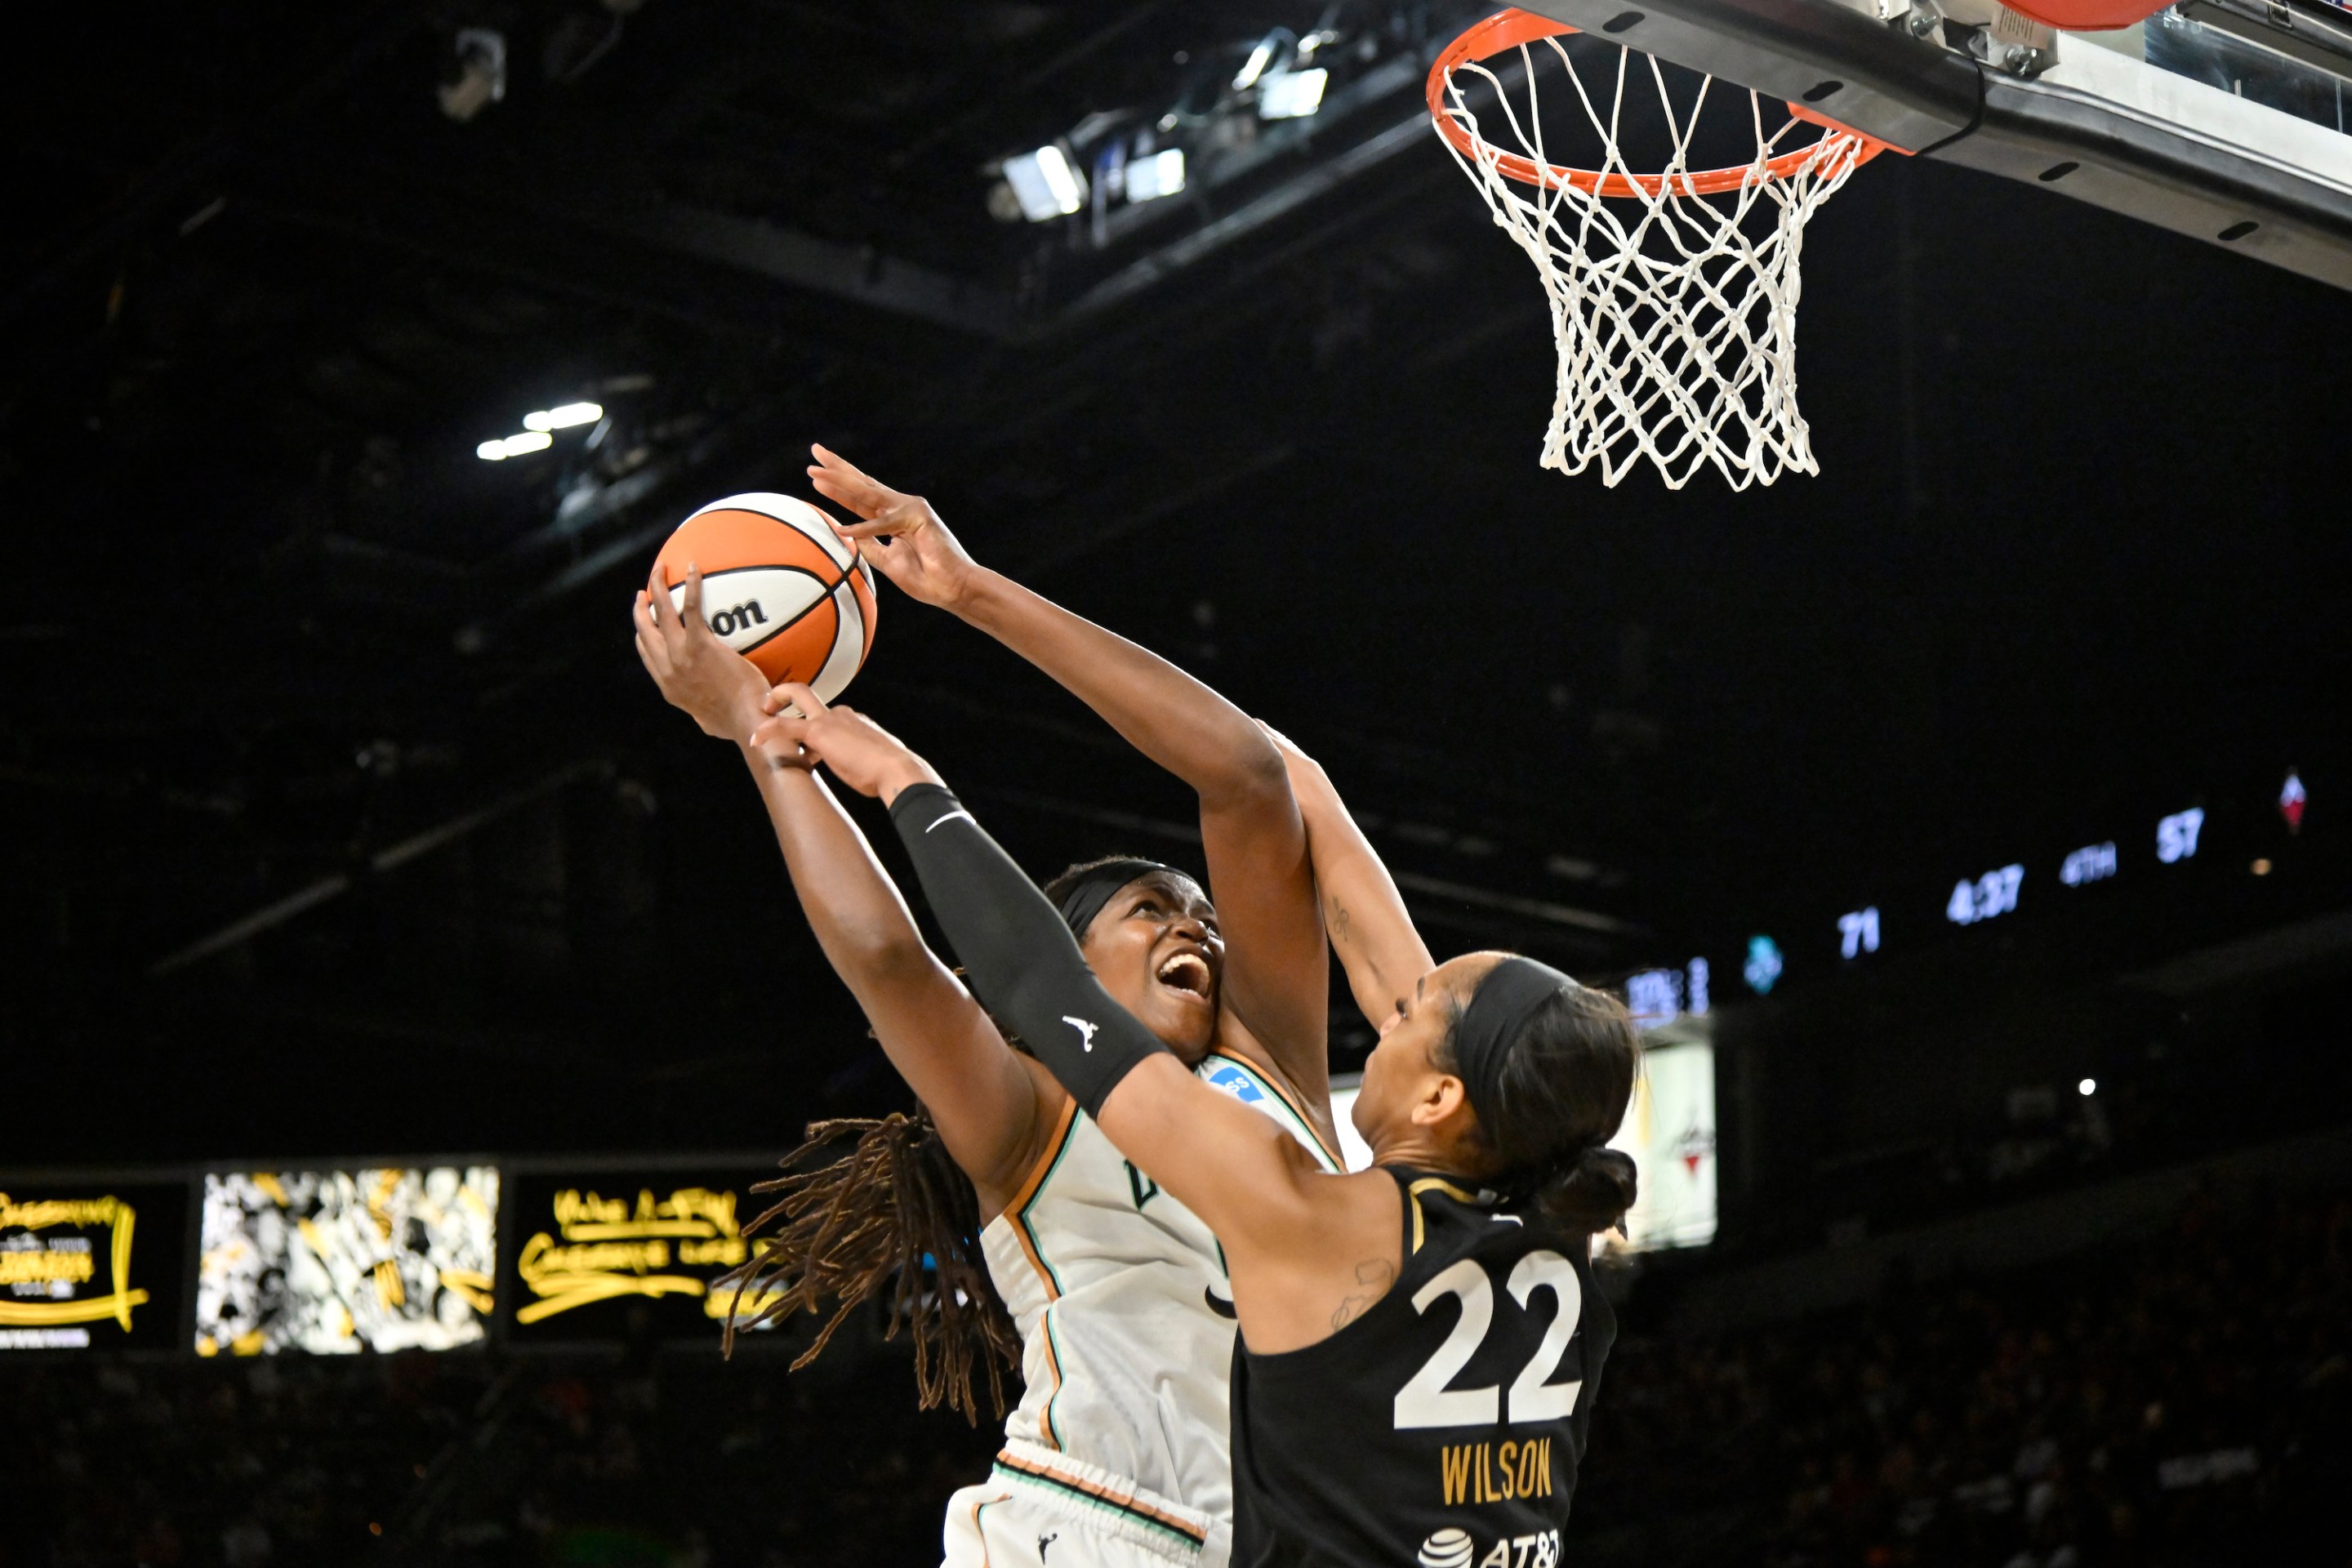 Jonquel Jones #35 of the New York Liberty drives to the basket during the 2023 WNBA Commissioner’s Cup Championship on August 15, 2023 at Michelob ULTRA Arena in Las Vegas, Nevada.